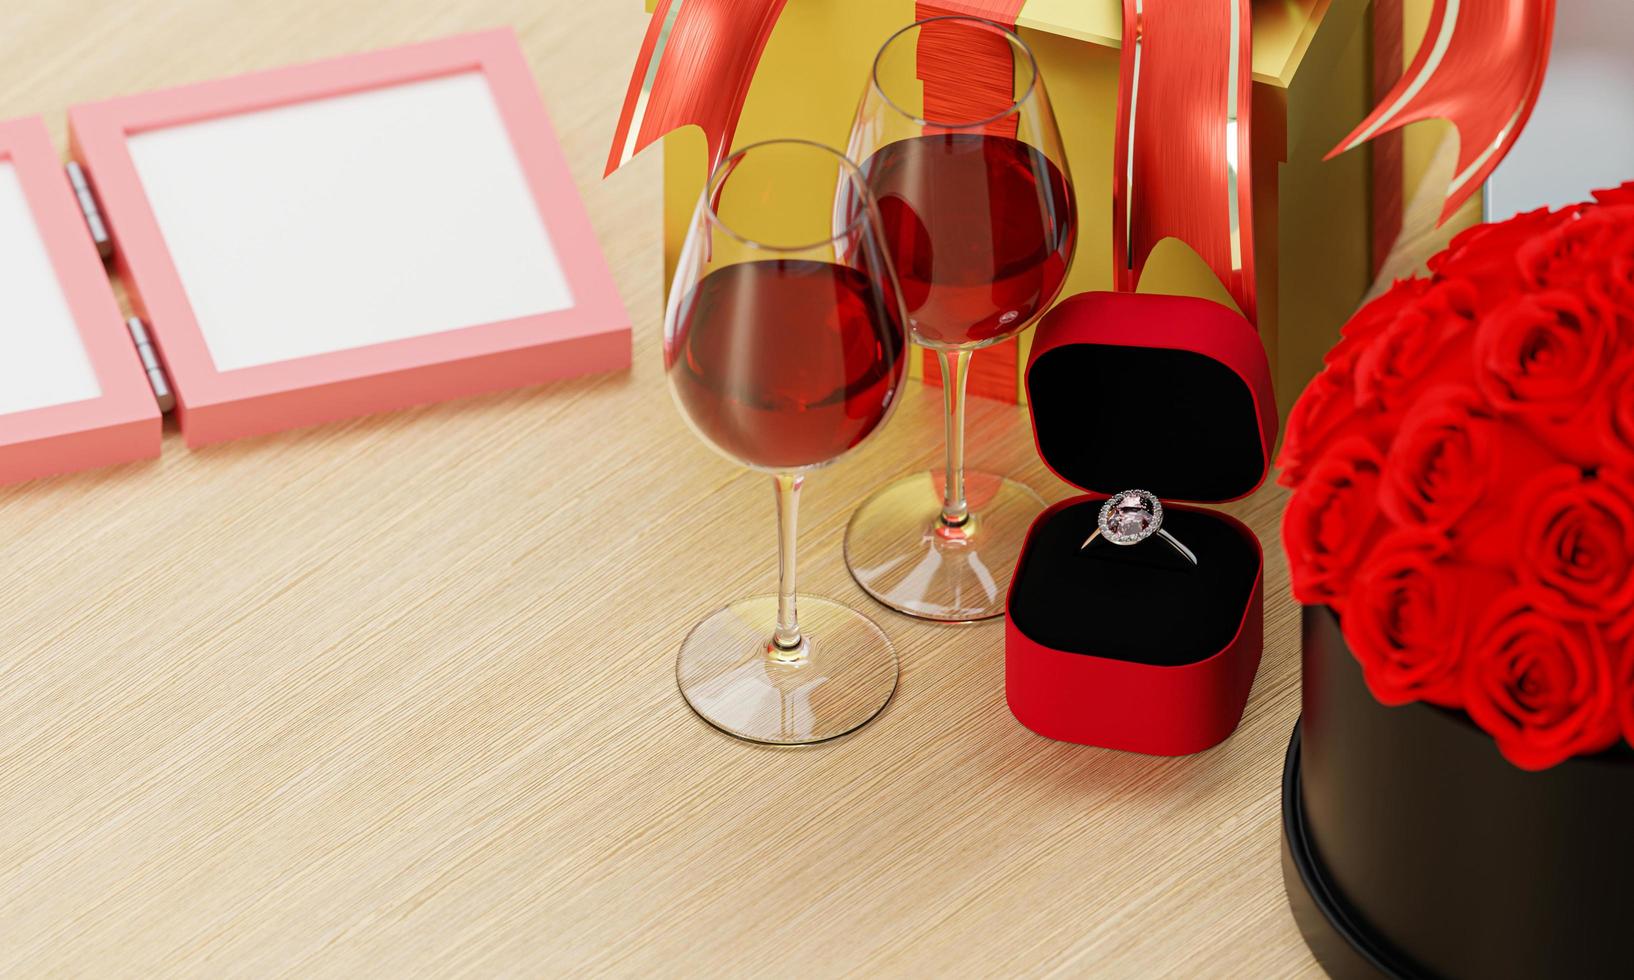 Celebrating love propose a diamond ring and a large bouquet of red diamonds Luxury gift box Red wine in Glass A blank photo frame. Blank white tablet screen is placed on Wood-grain table. 3D Rendering